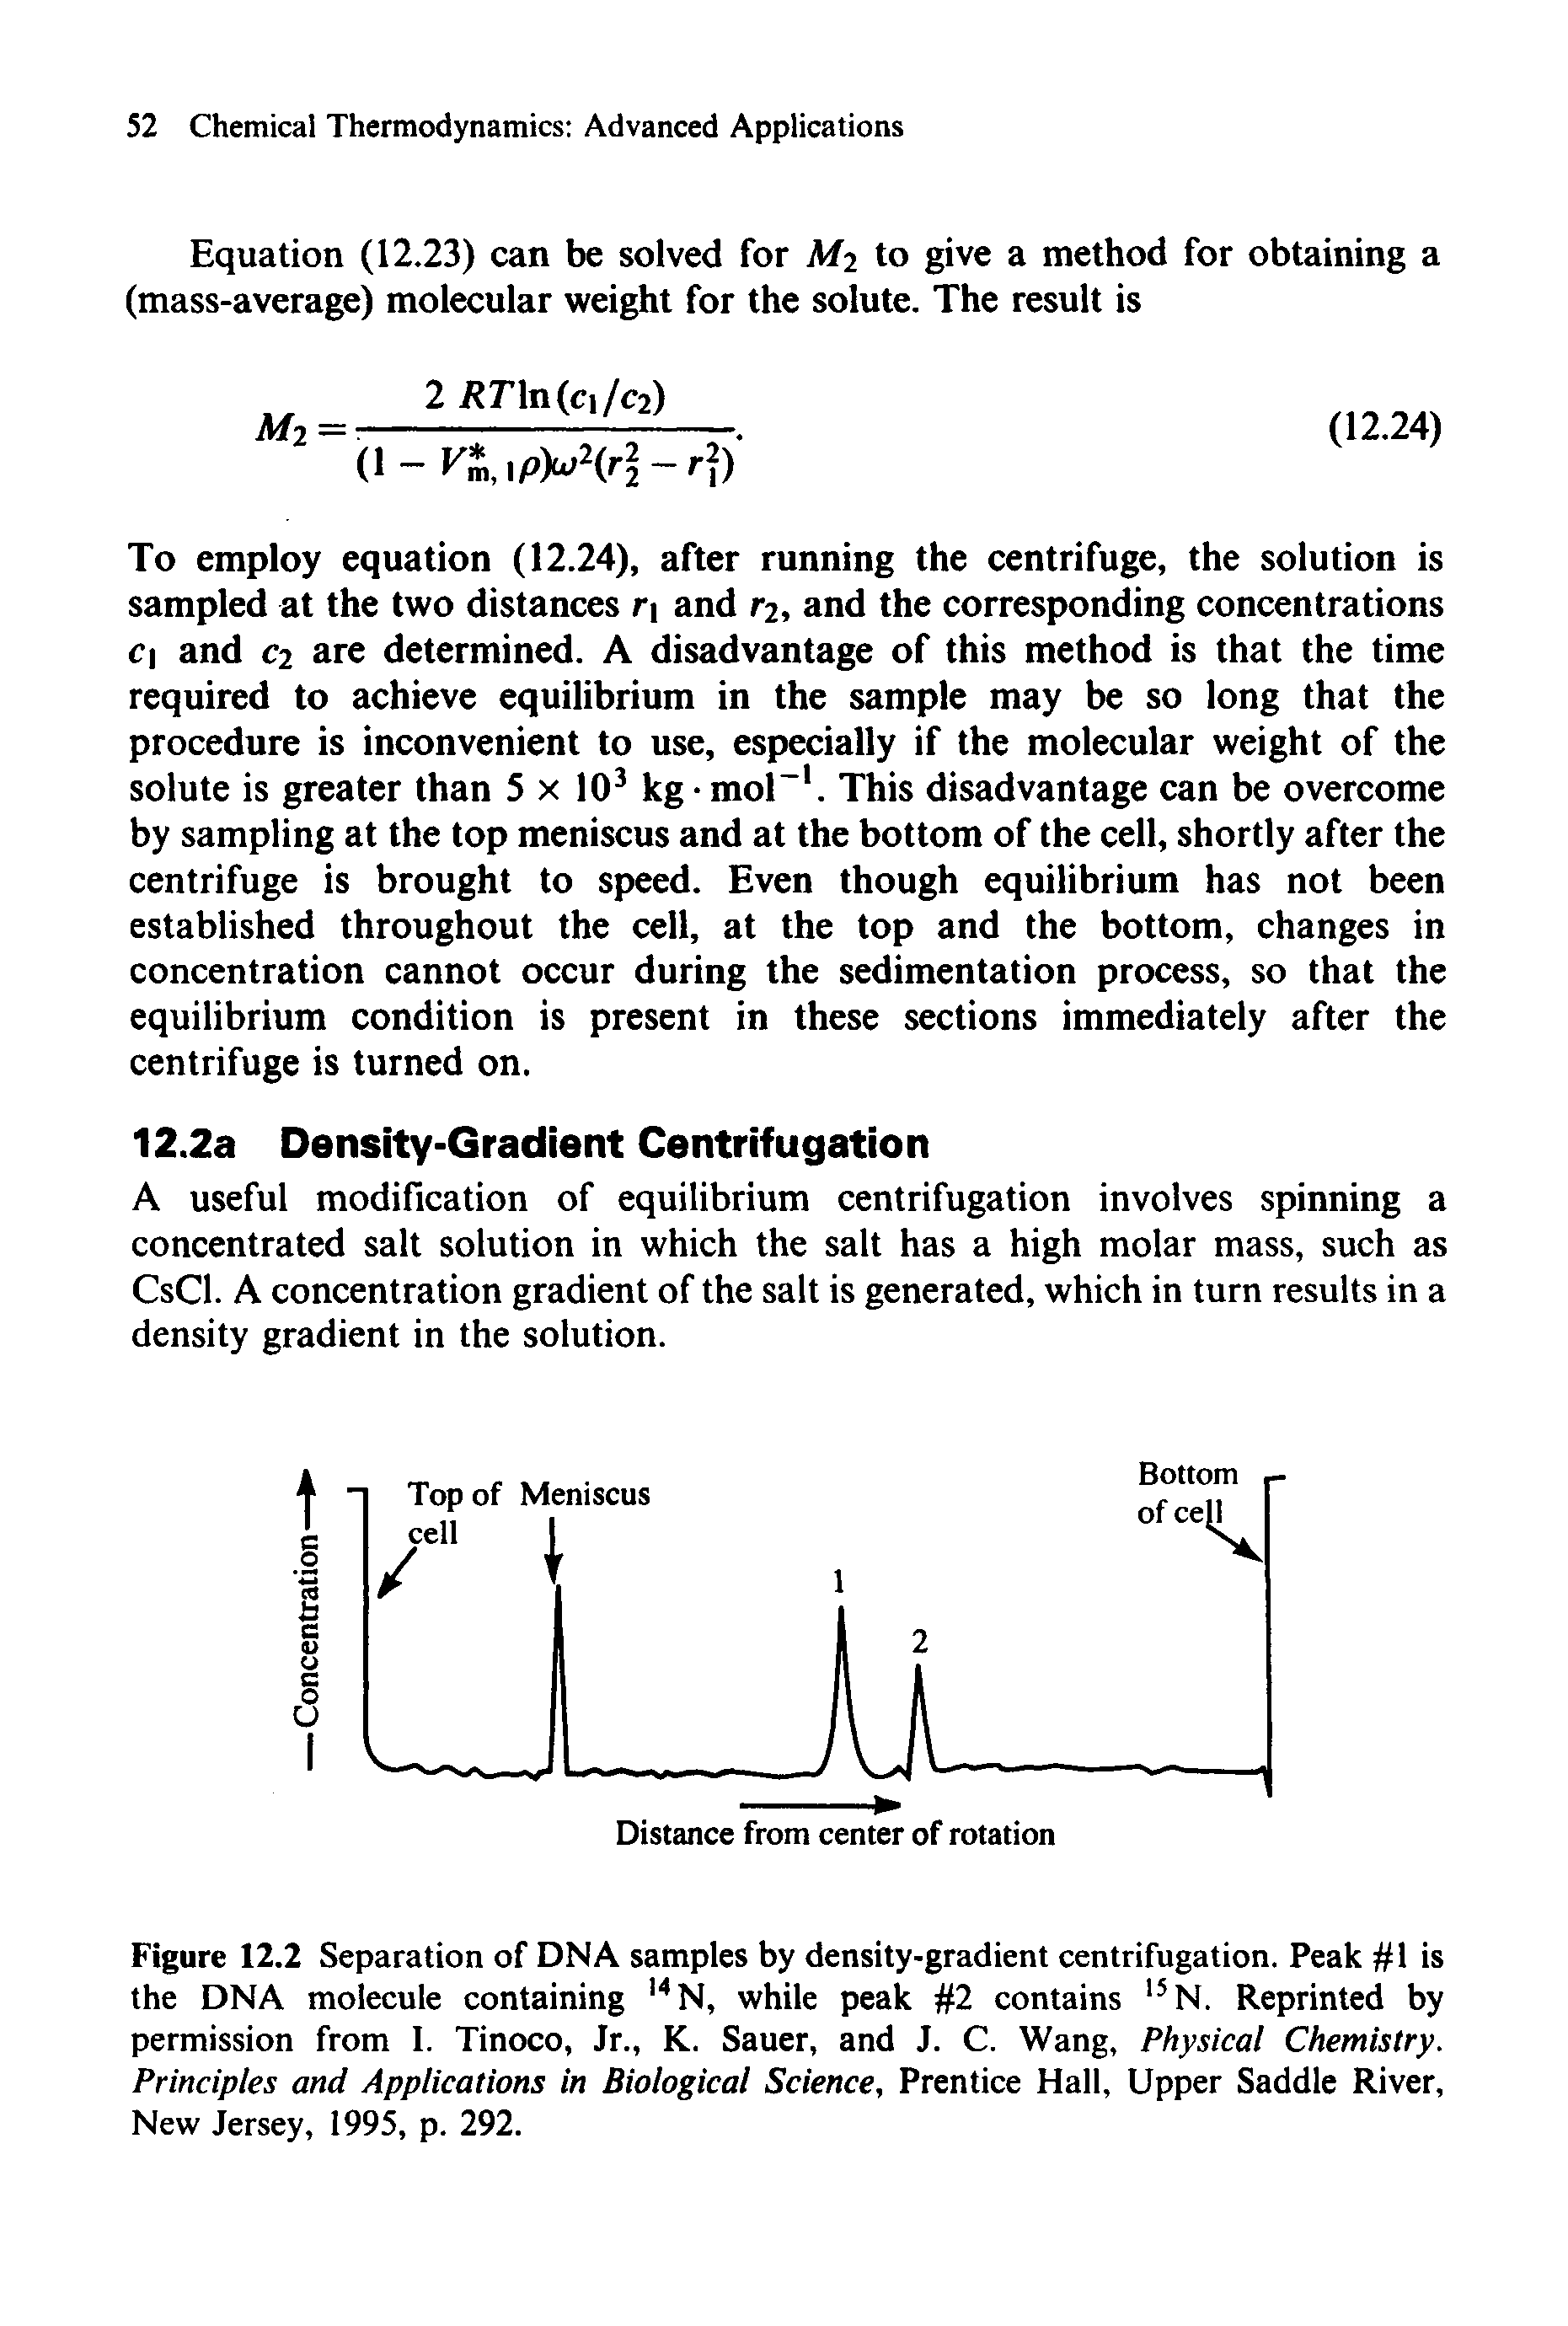 Figure 12.2 Separation of DNA samples by density-gradient centrifugation. Peak 1 is the DNA molecule containing 14 N, while peak 2 contains 15 N. Reprinted by permission from I. Tinoco, Jr., K. Sauer, and J. C. Wang, Physical Chemistry. Principles and Applications in Biological Science, Prentice Hall, Upper Saddle River, New Jersey, 1995, p. 292.